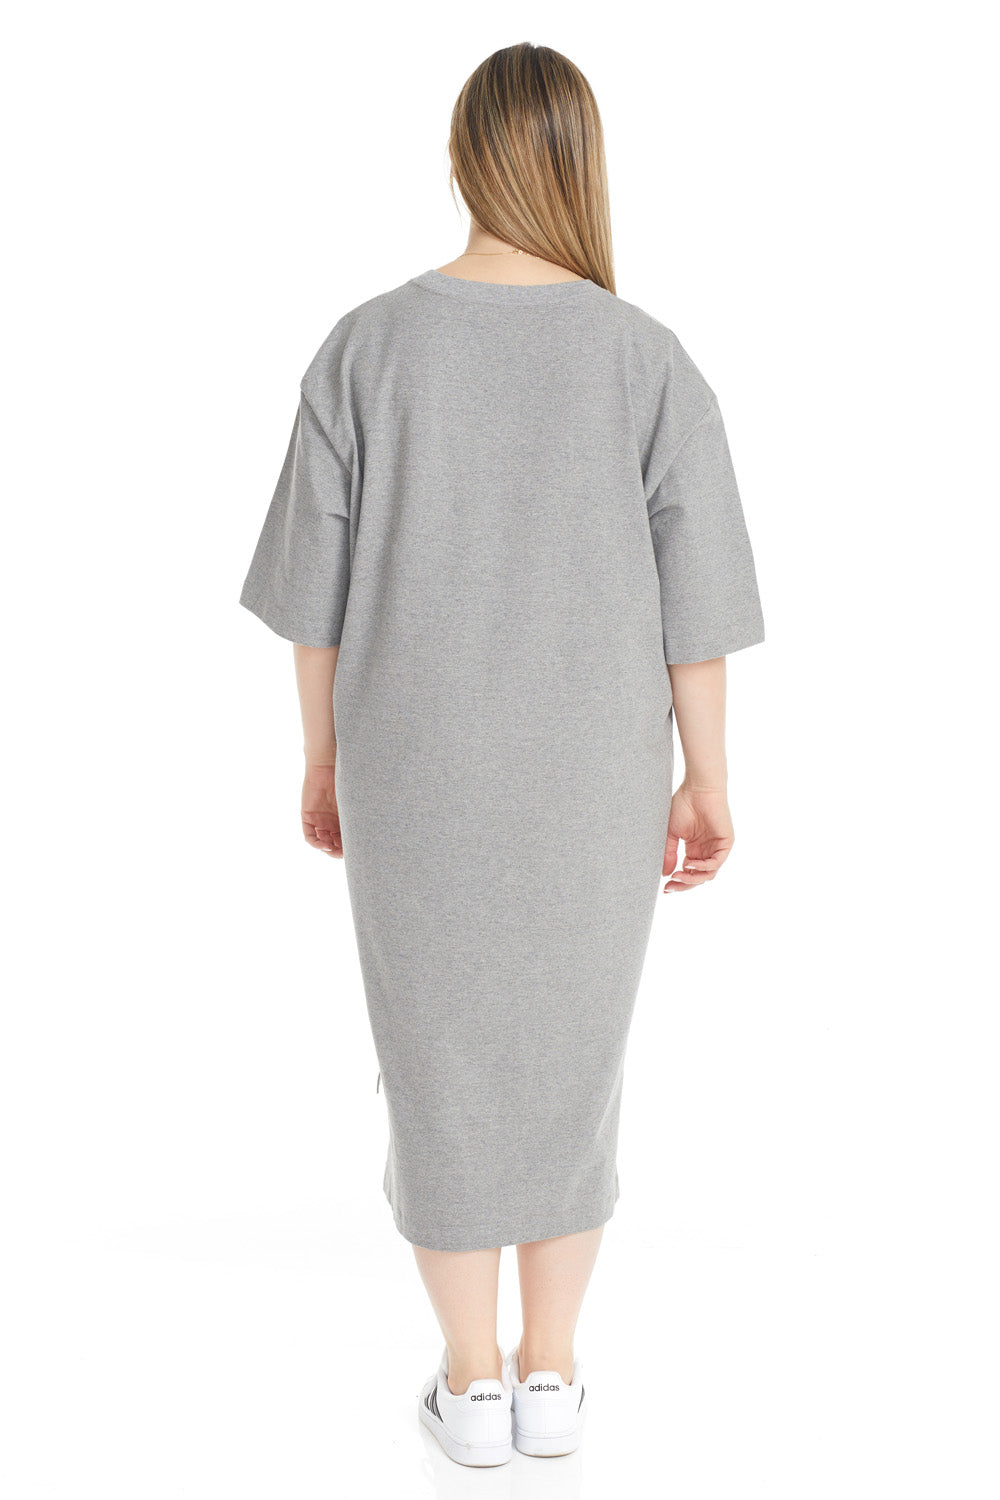 the back of plus size long midi length heather grey high low cotton crew neck 3/4 sleeve t-shirt dress